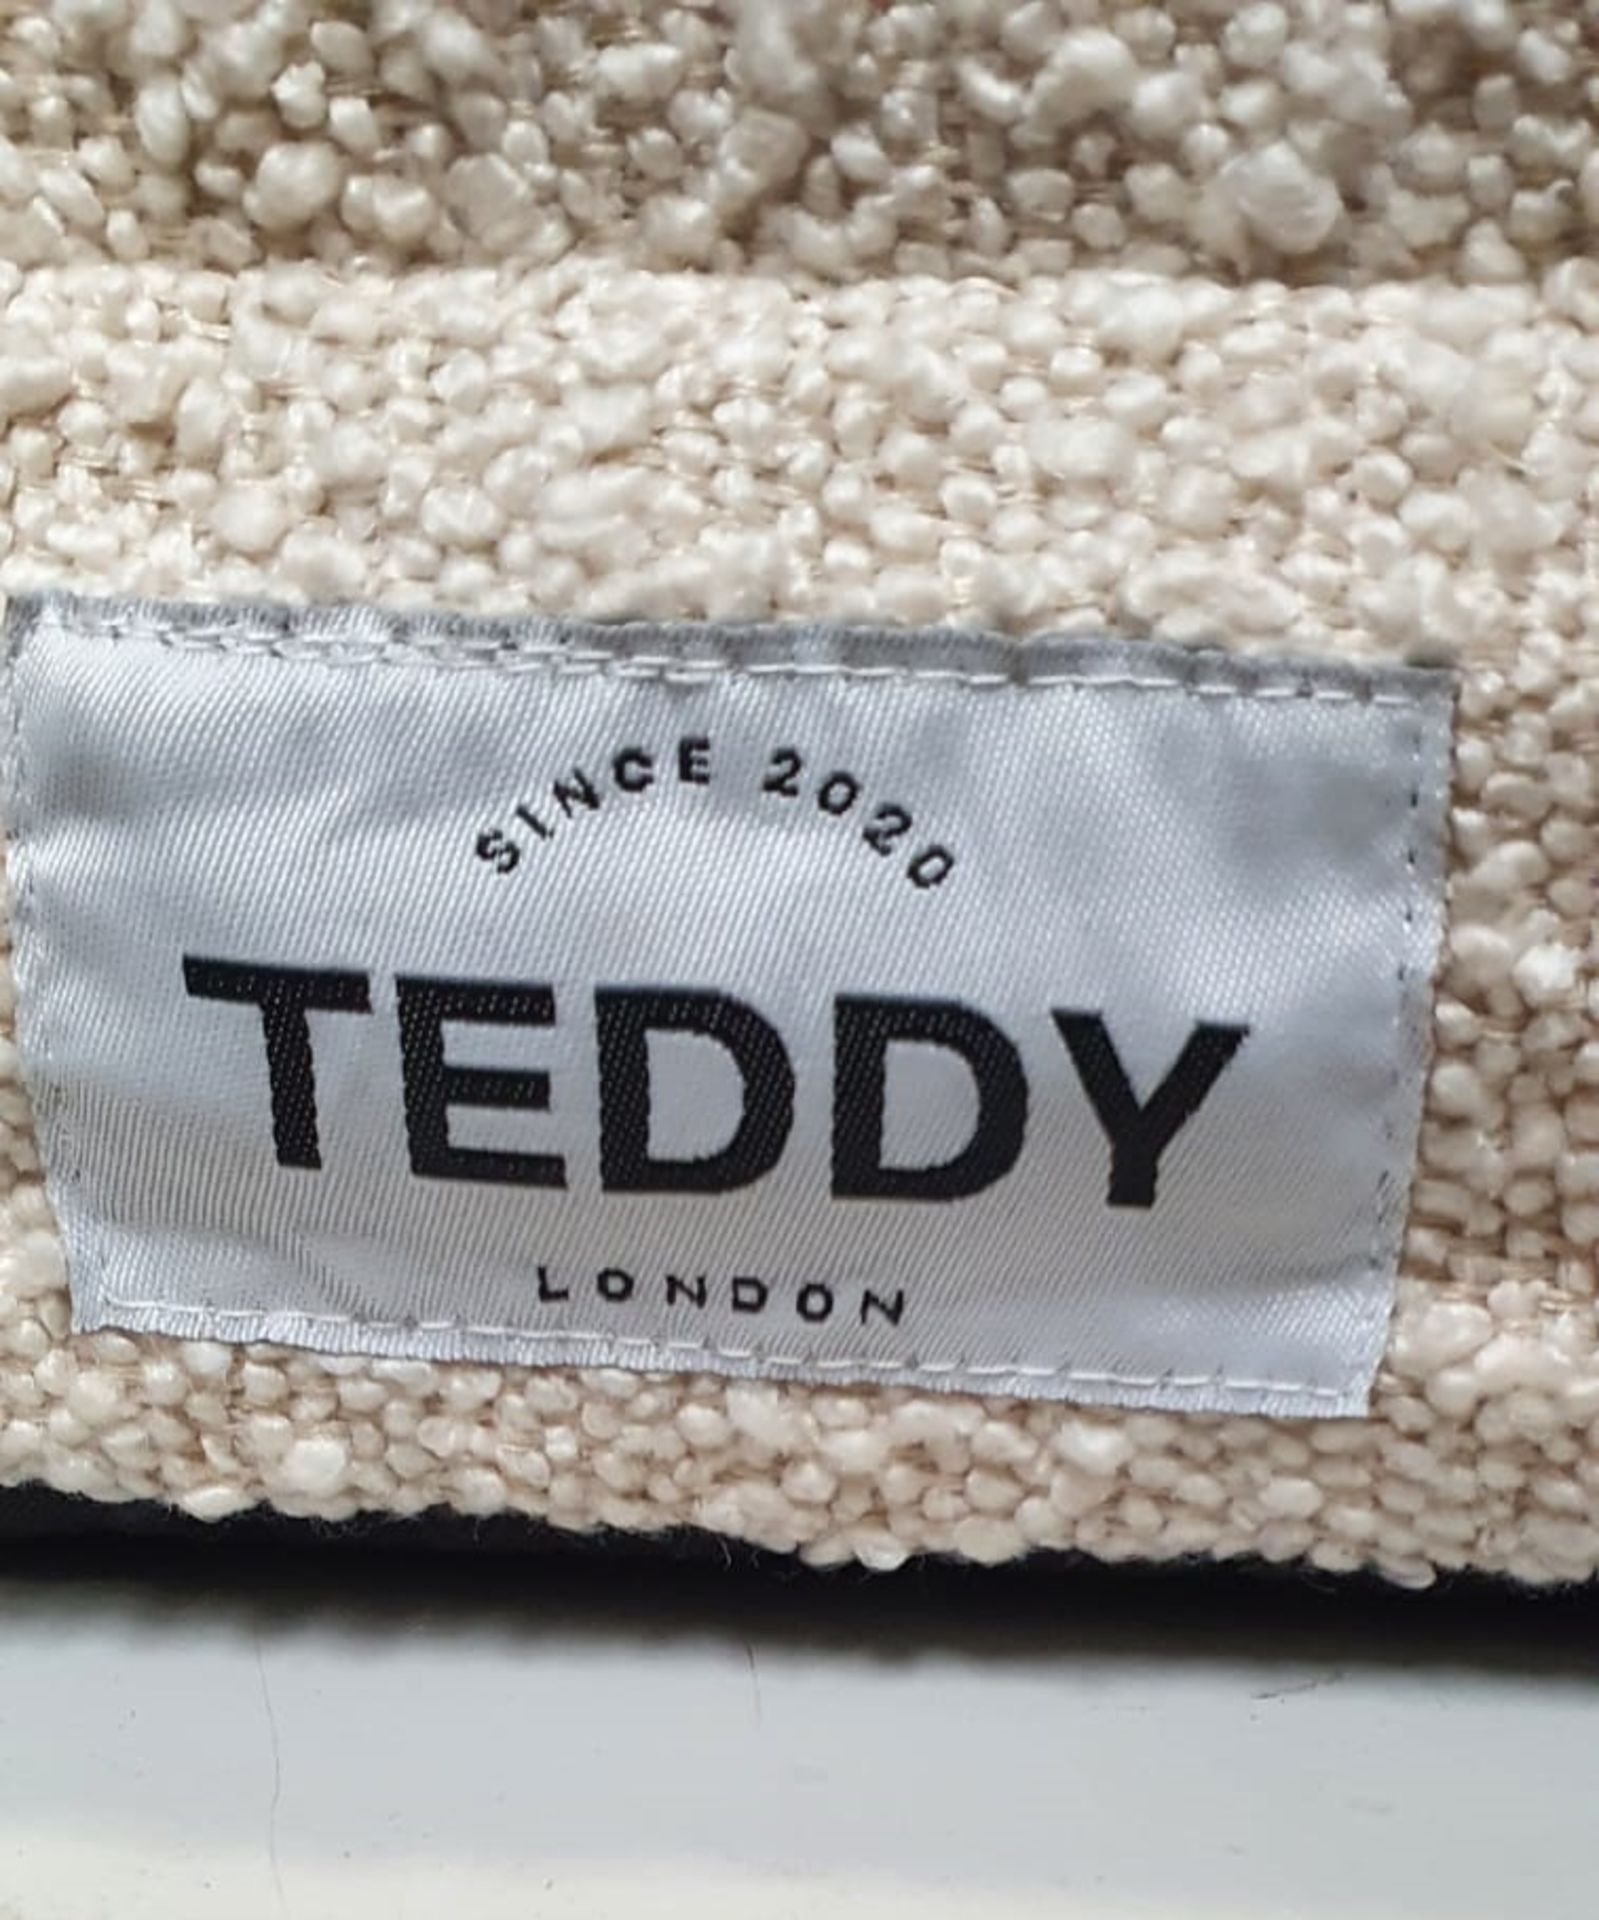 1 x TEDDY Luxury Dog Bed - Dimensions: 74 x 62cm - Unused Unboxed Stock - Image 2 of 3